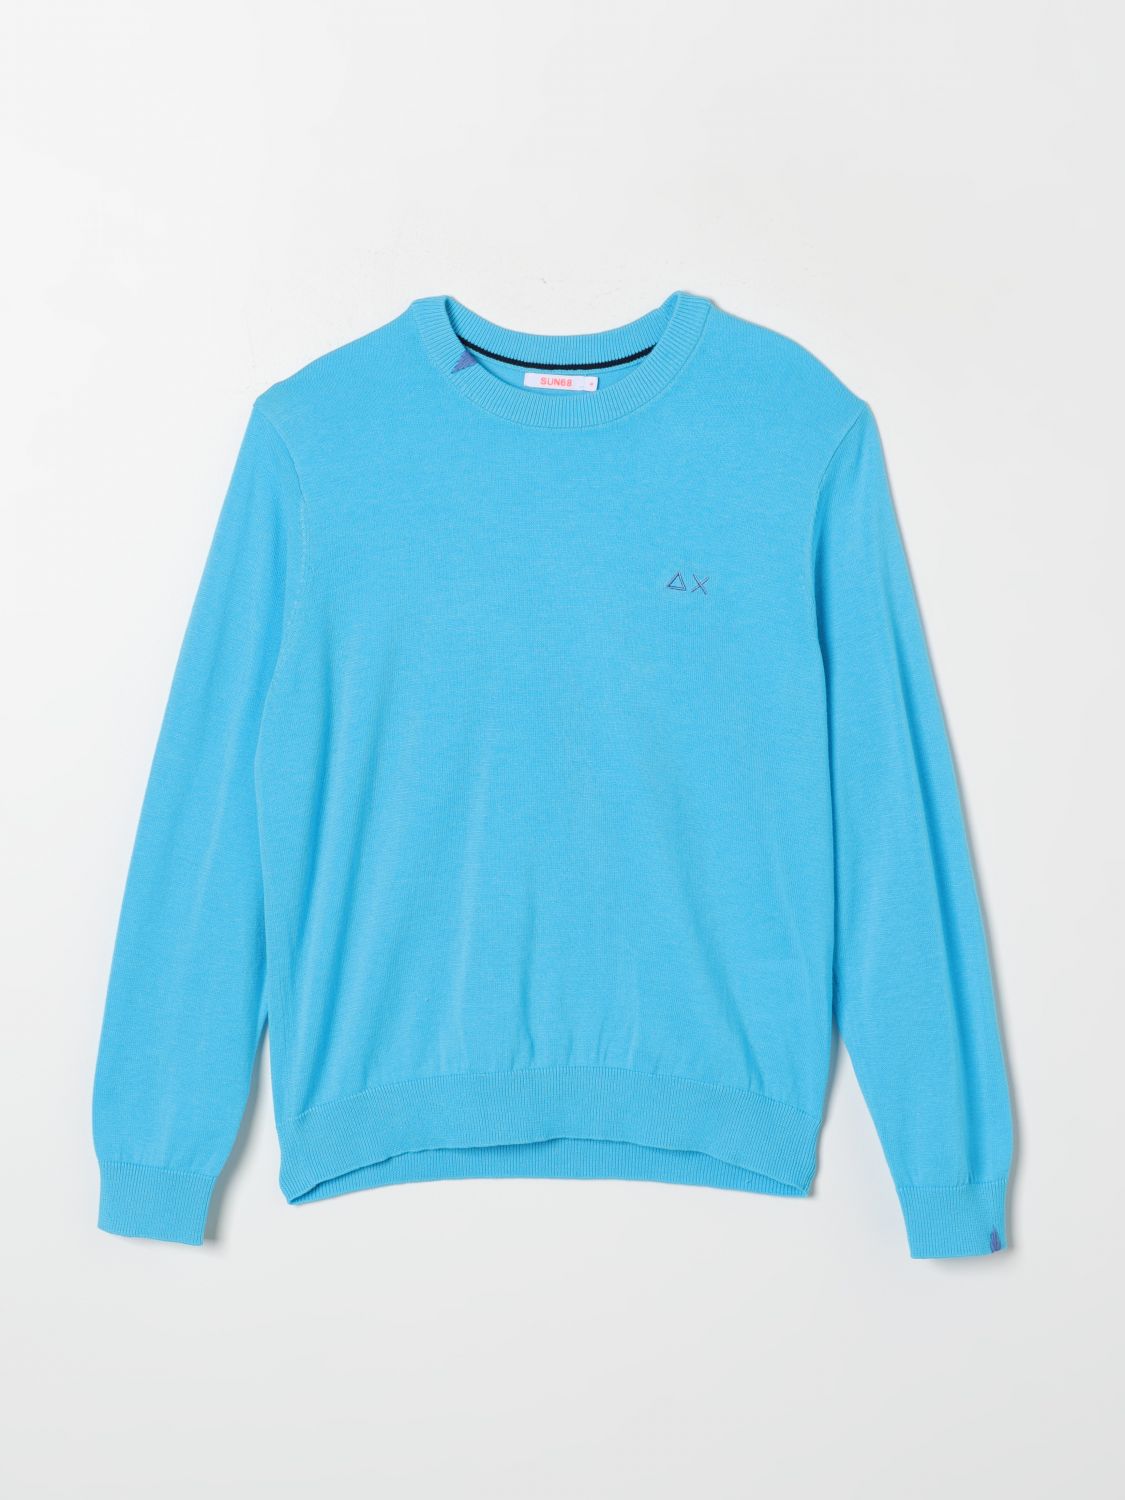 Sun 68 Sweater  Kids Color Turquoise In 绿松石蓝